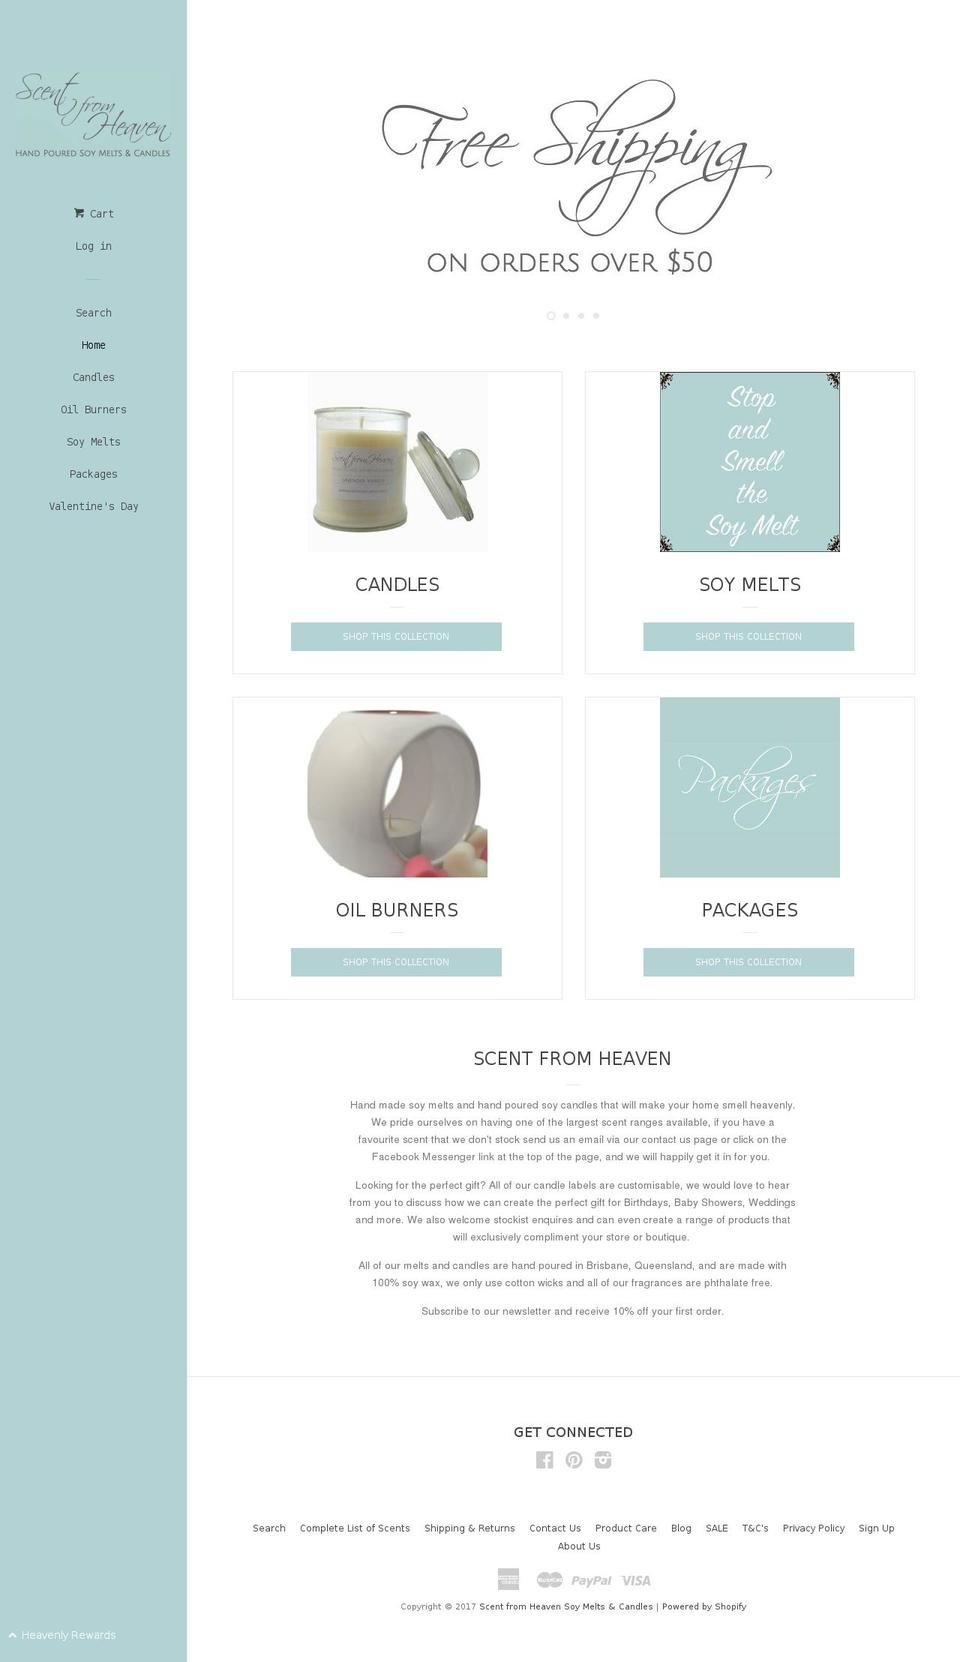 scent-from-heaven-soy-melts-candles.myshopify.com shopify website screenshot